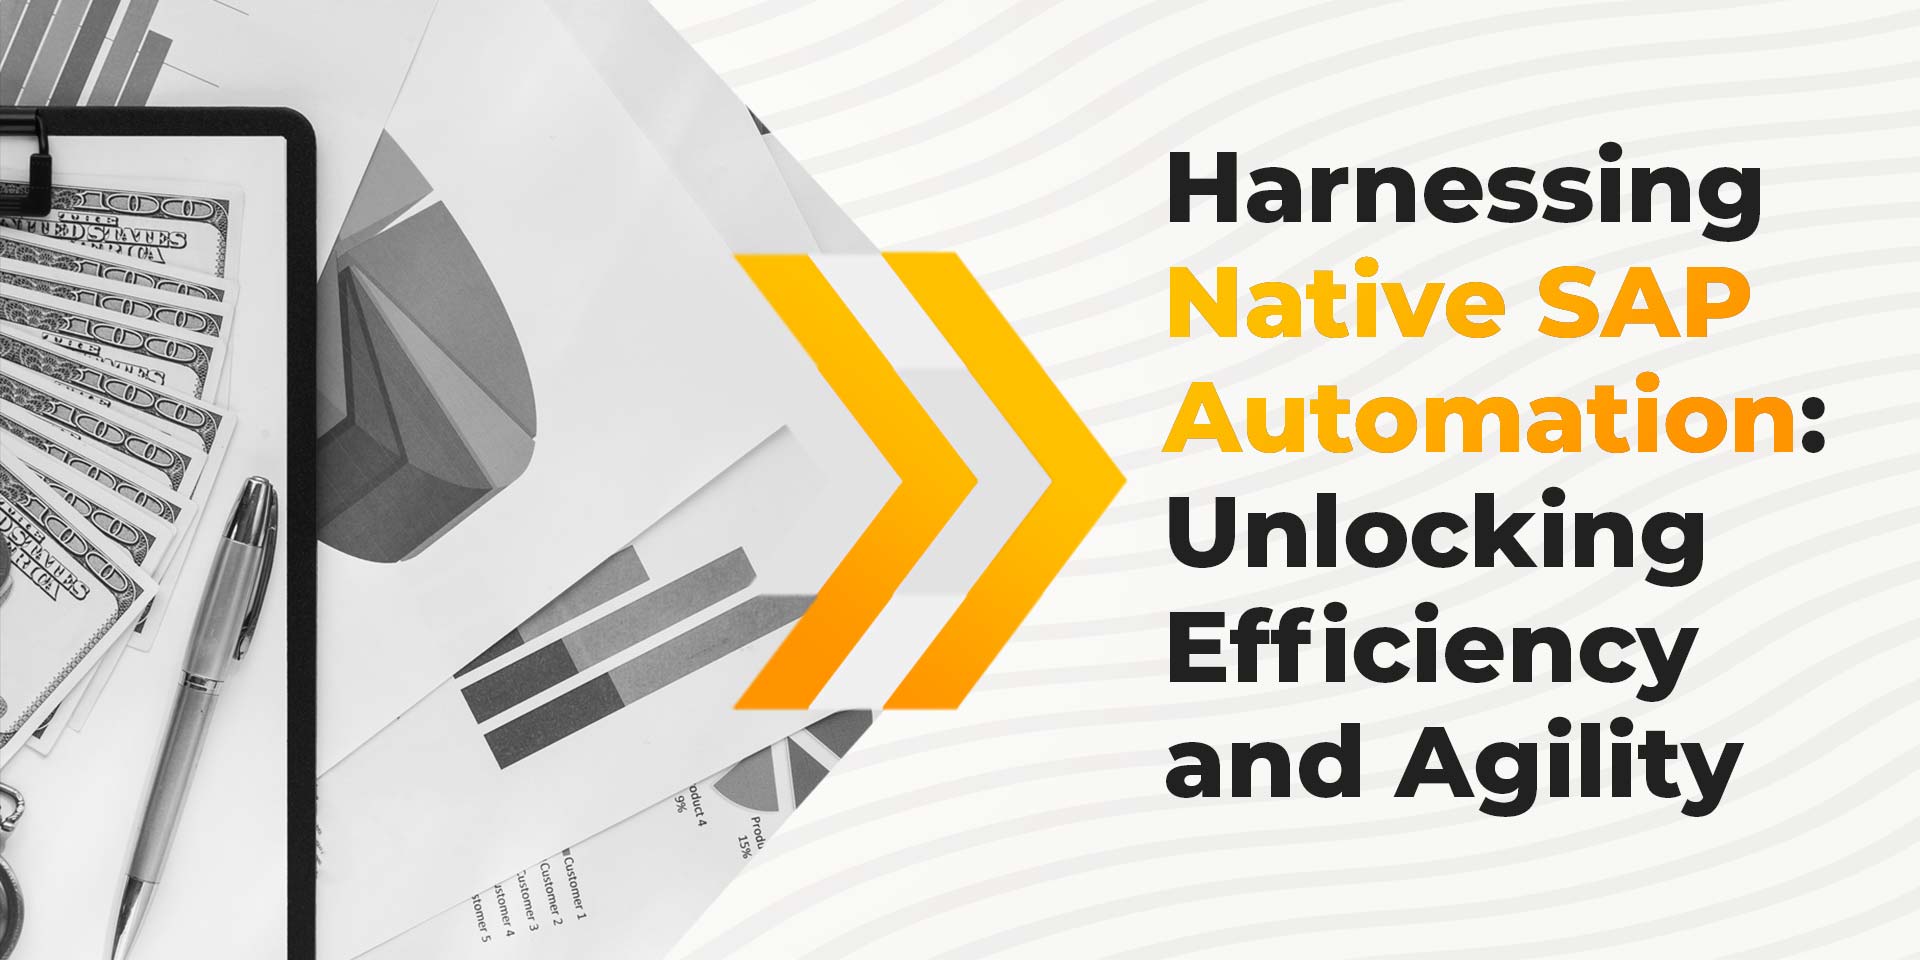 Harnessing Native SAP Automation- Unlocking Efficiency and Agility